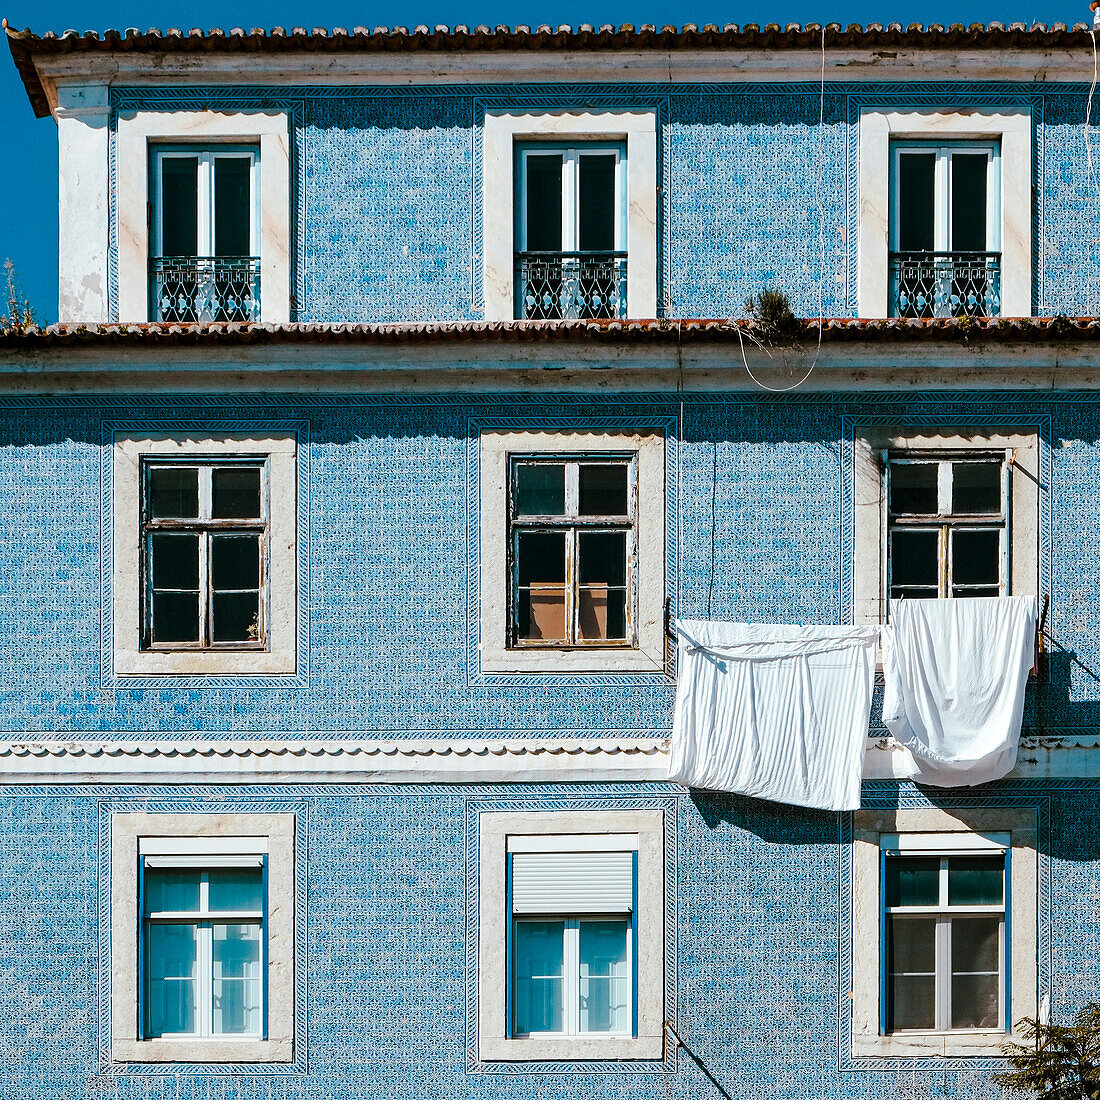 Portugal, Lisbon, Typical Portuguese Pombaline building with laundry hanging to dry